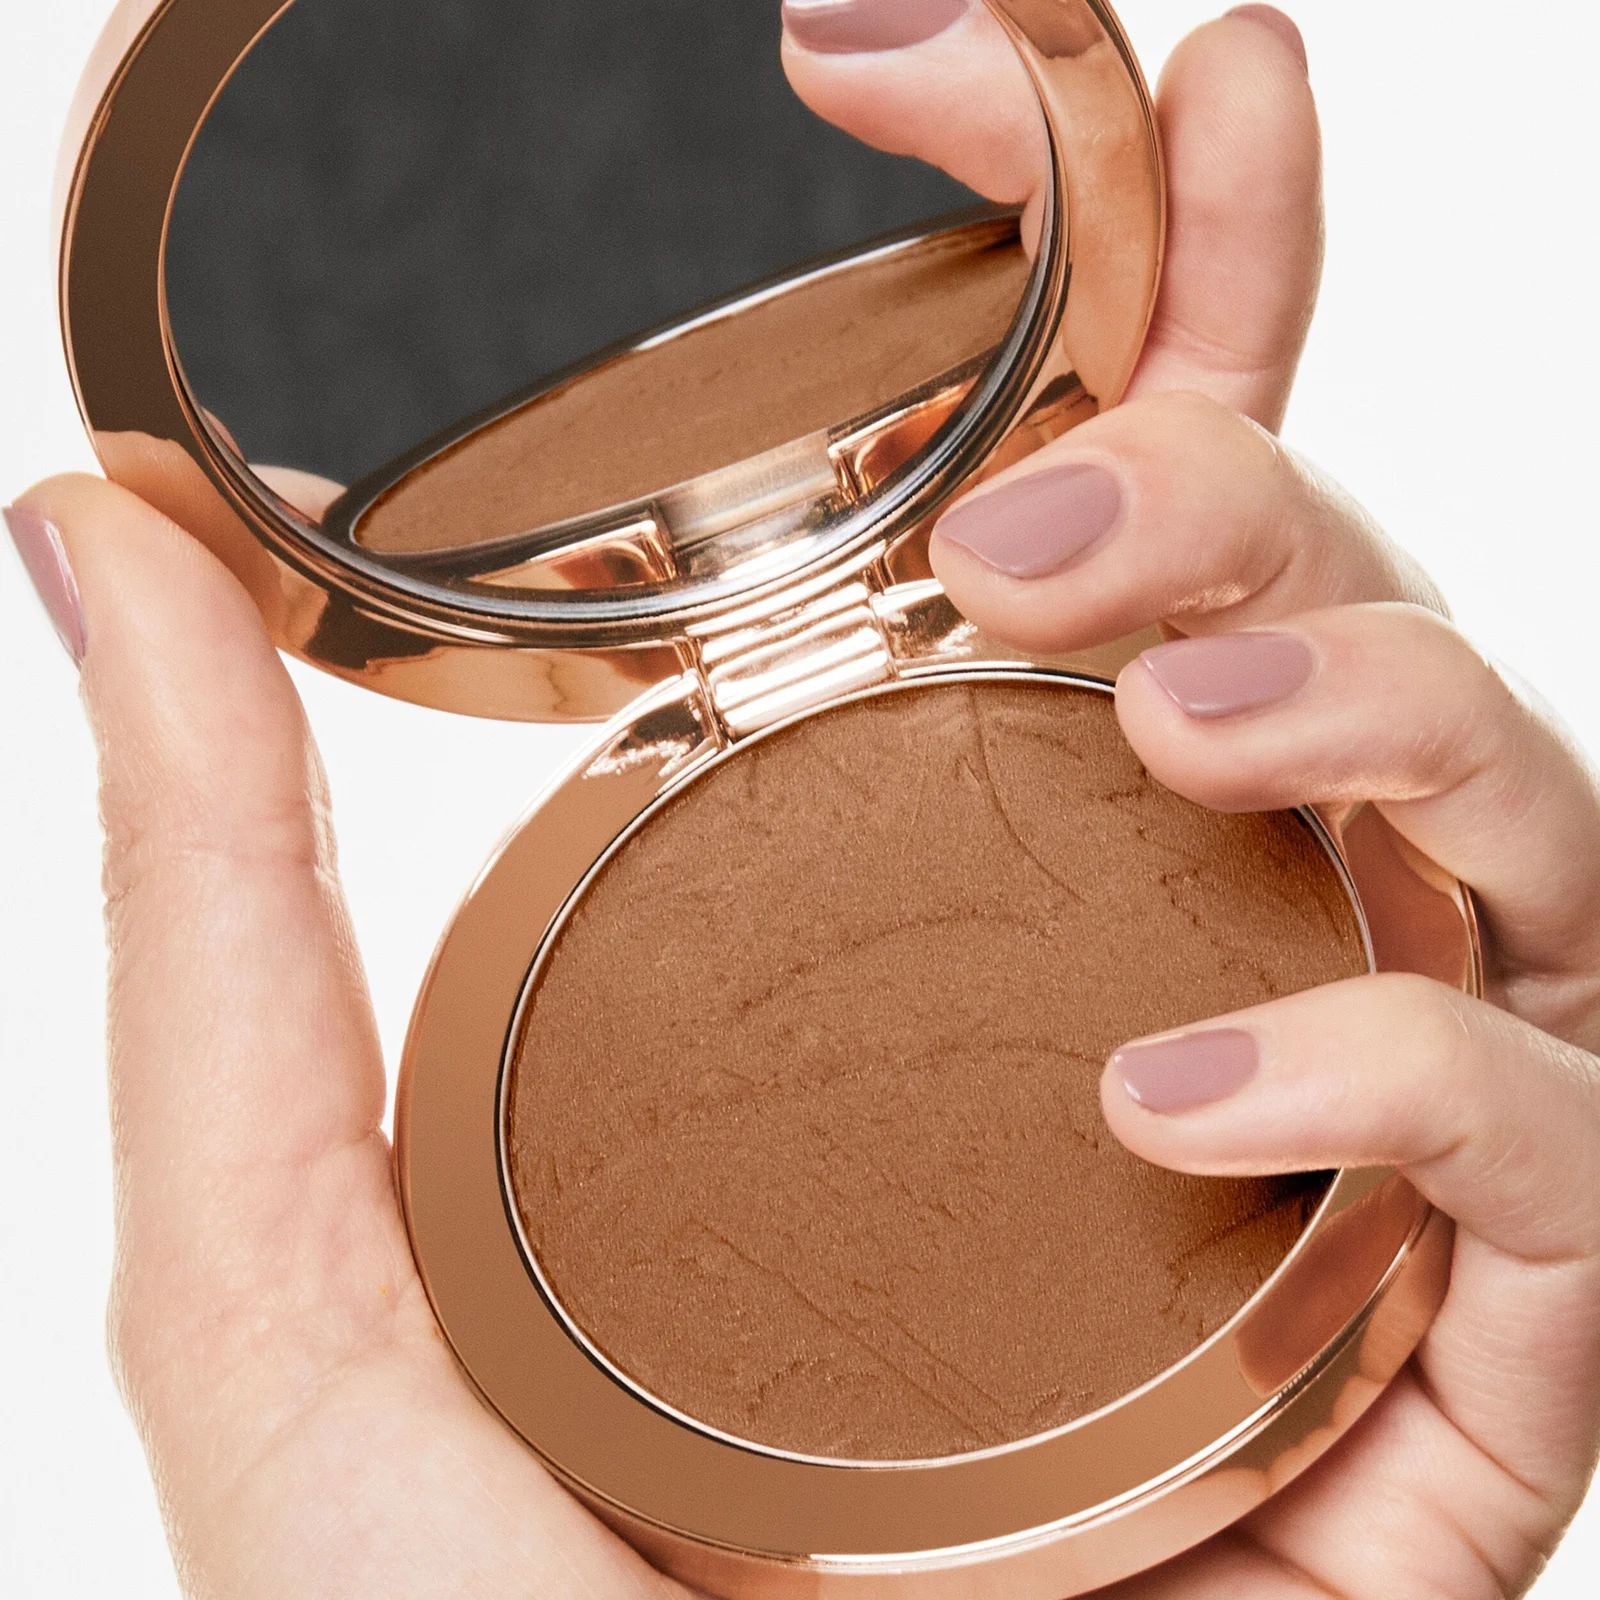 Pure bronzing perfection. (In a responsible, refillable compact.) | Beauty Pie (UK)